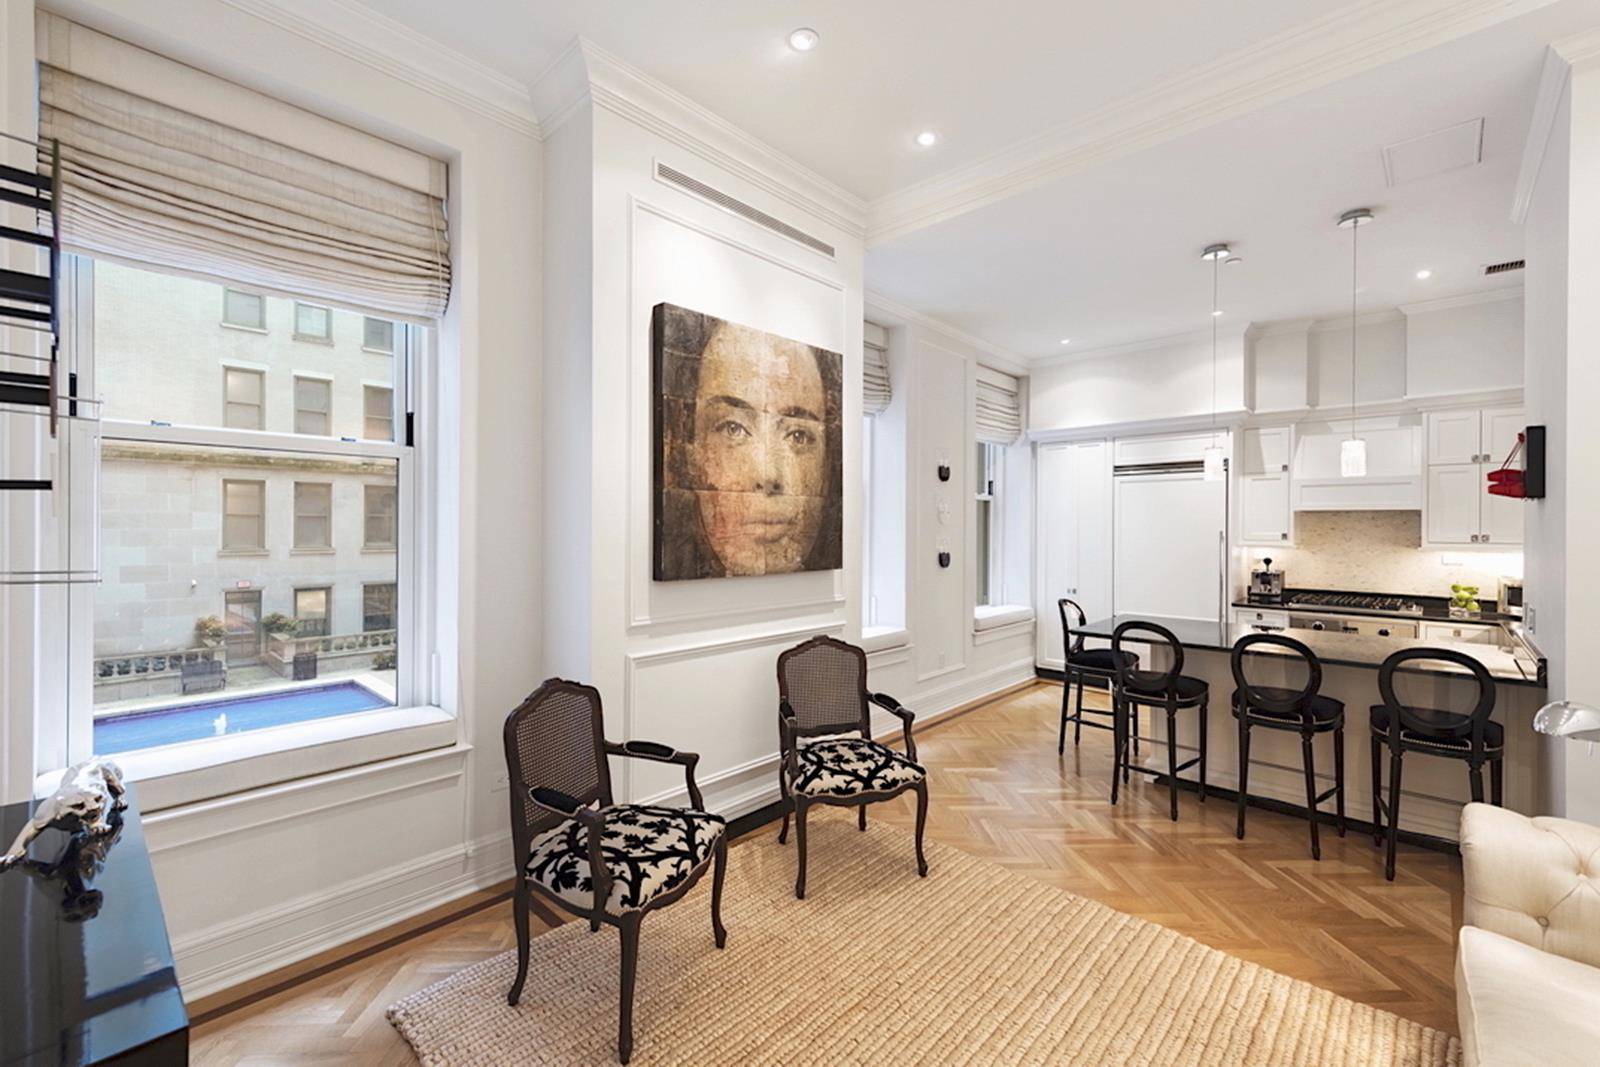 Nestled across from Central Park in the historic Plaza Hotel building, this immaculate 1 bedroom, 1 bathroom condo is a unique blend of classic city elegance and contemporary charm.